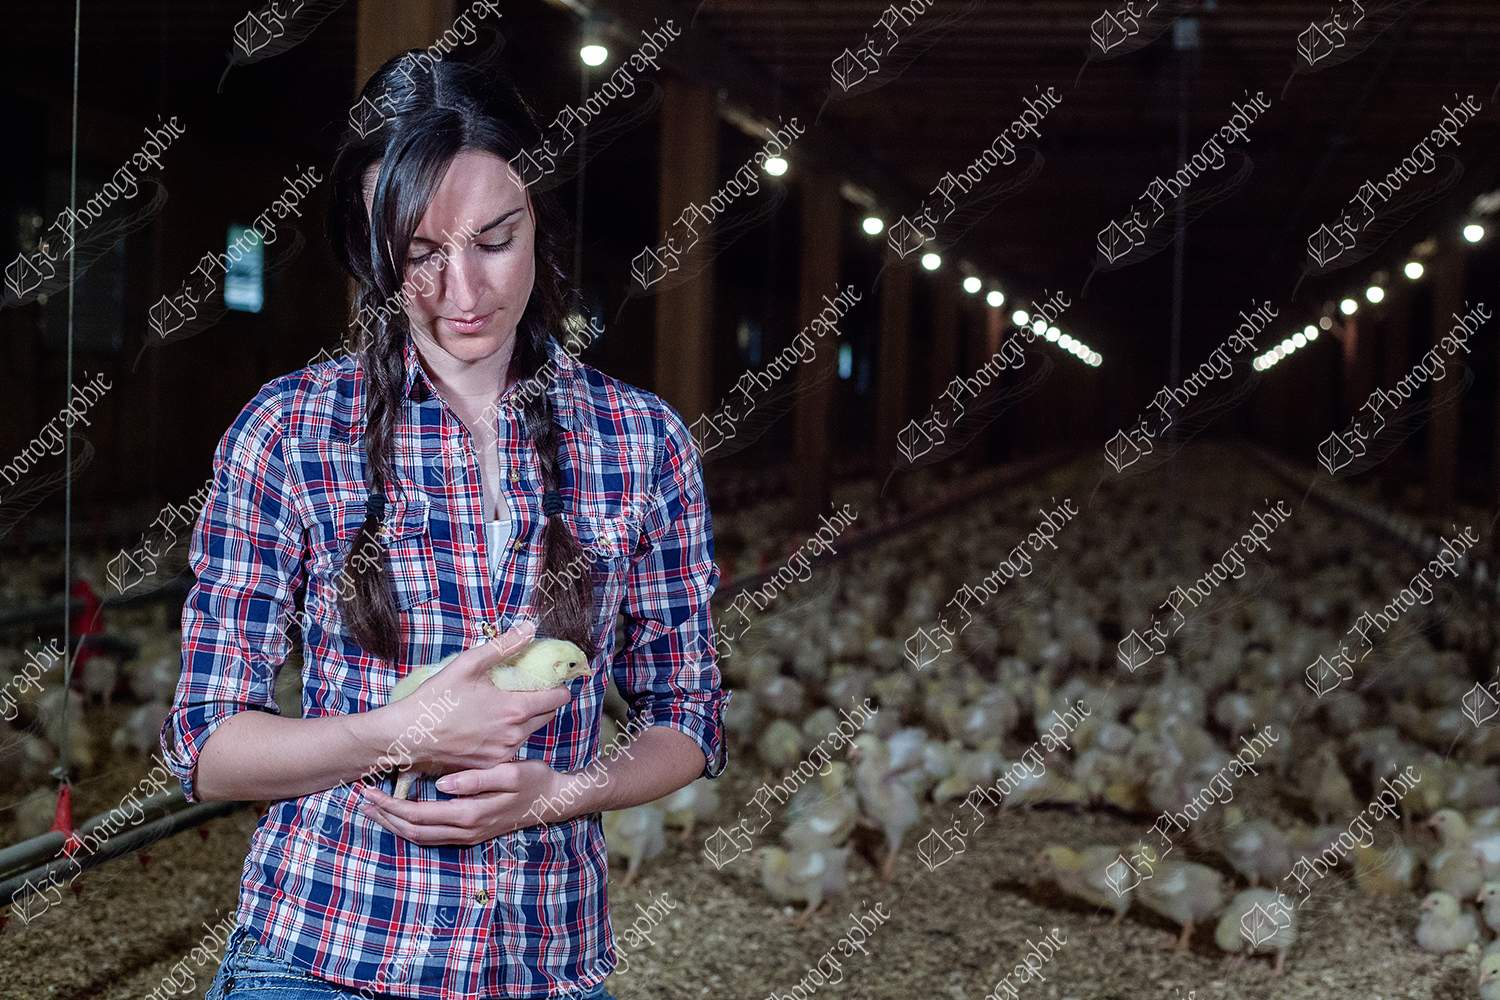 elze_photo_9070_agriculture_elevage_poulets_chicken_lady